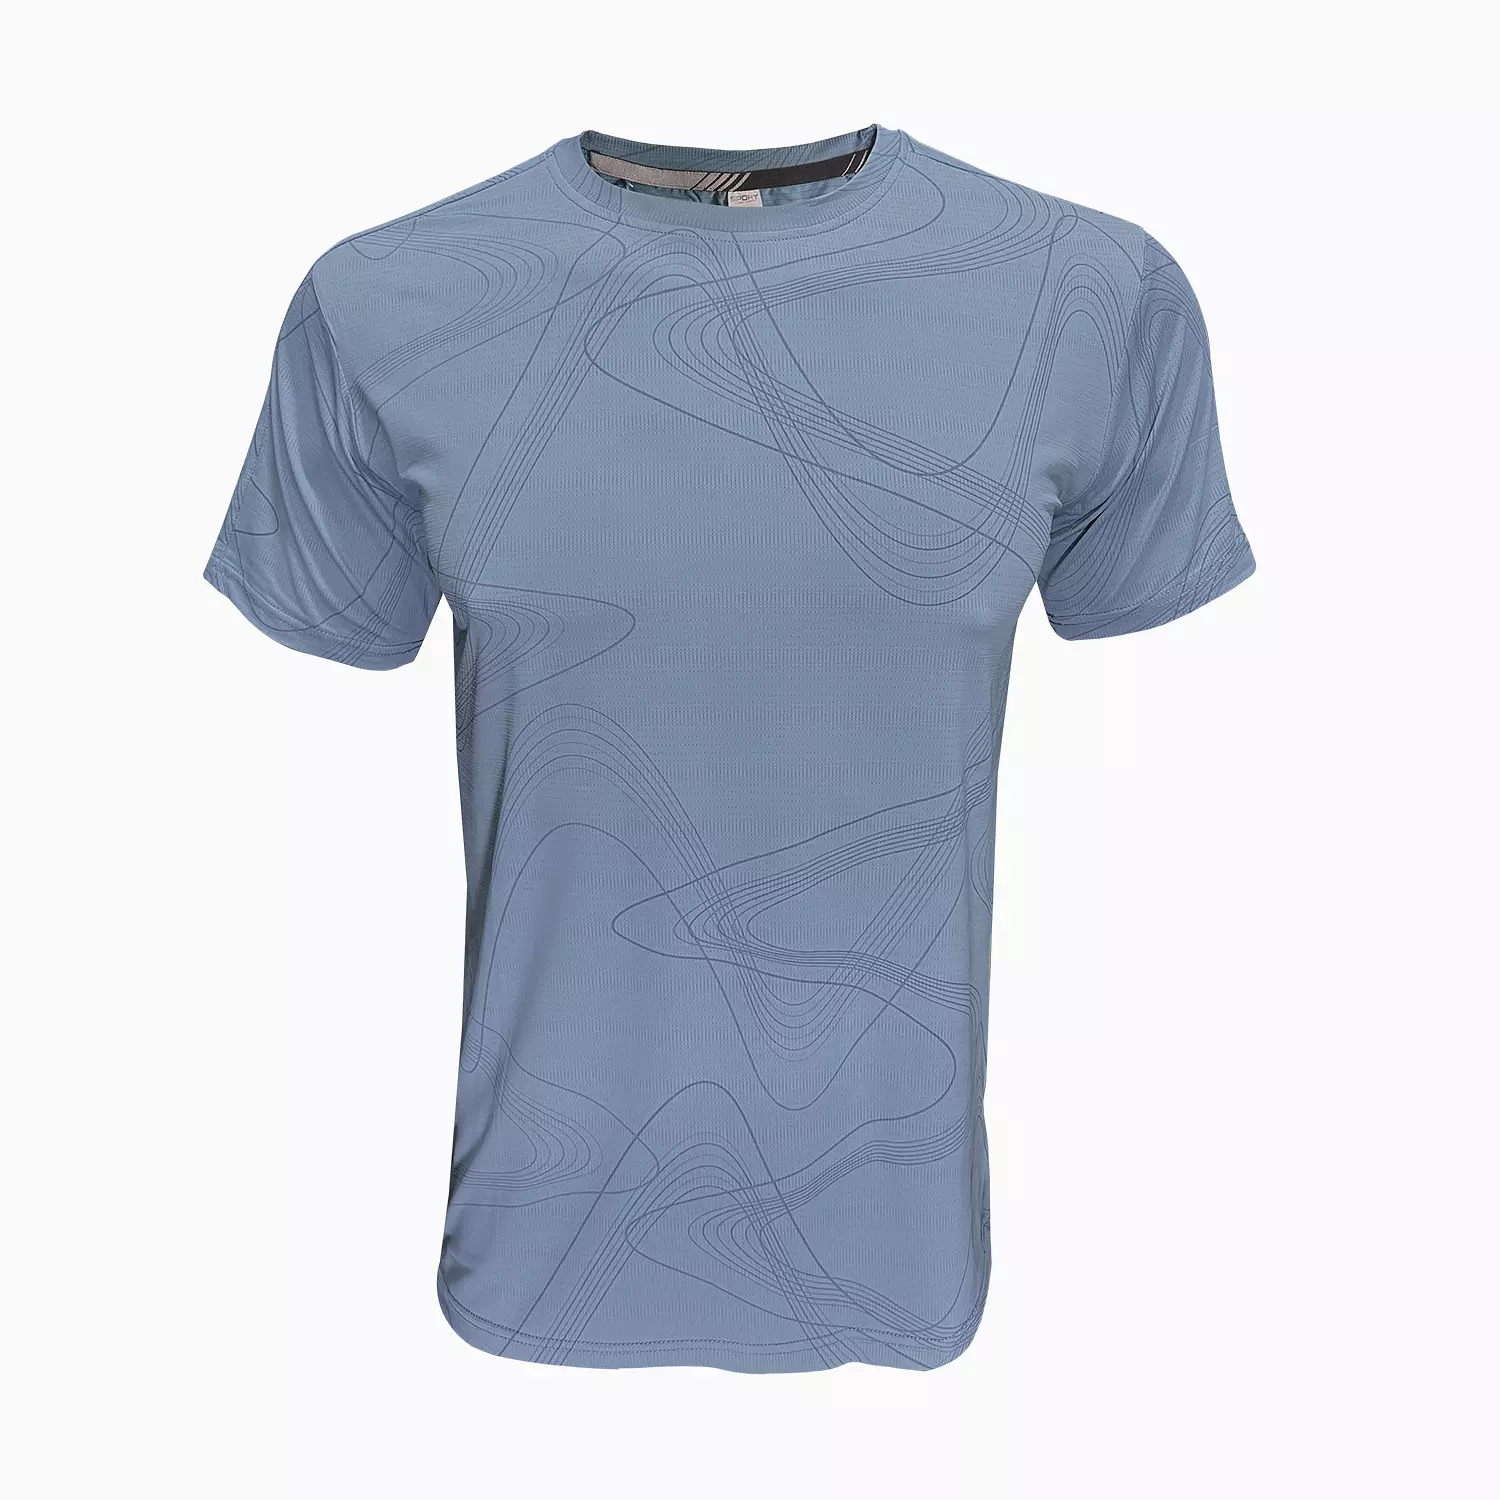 TEXTURE TRAINING T-SHIRT hover image